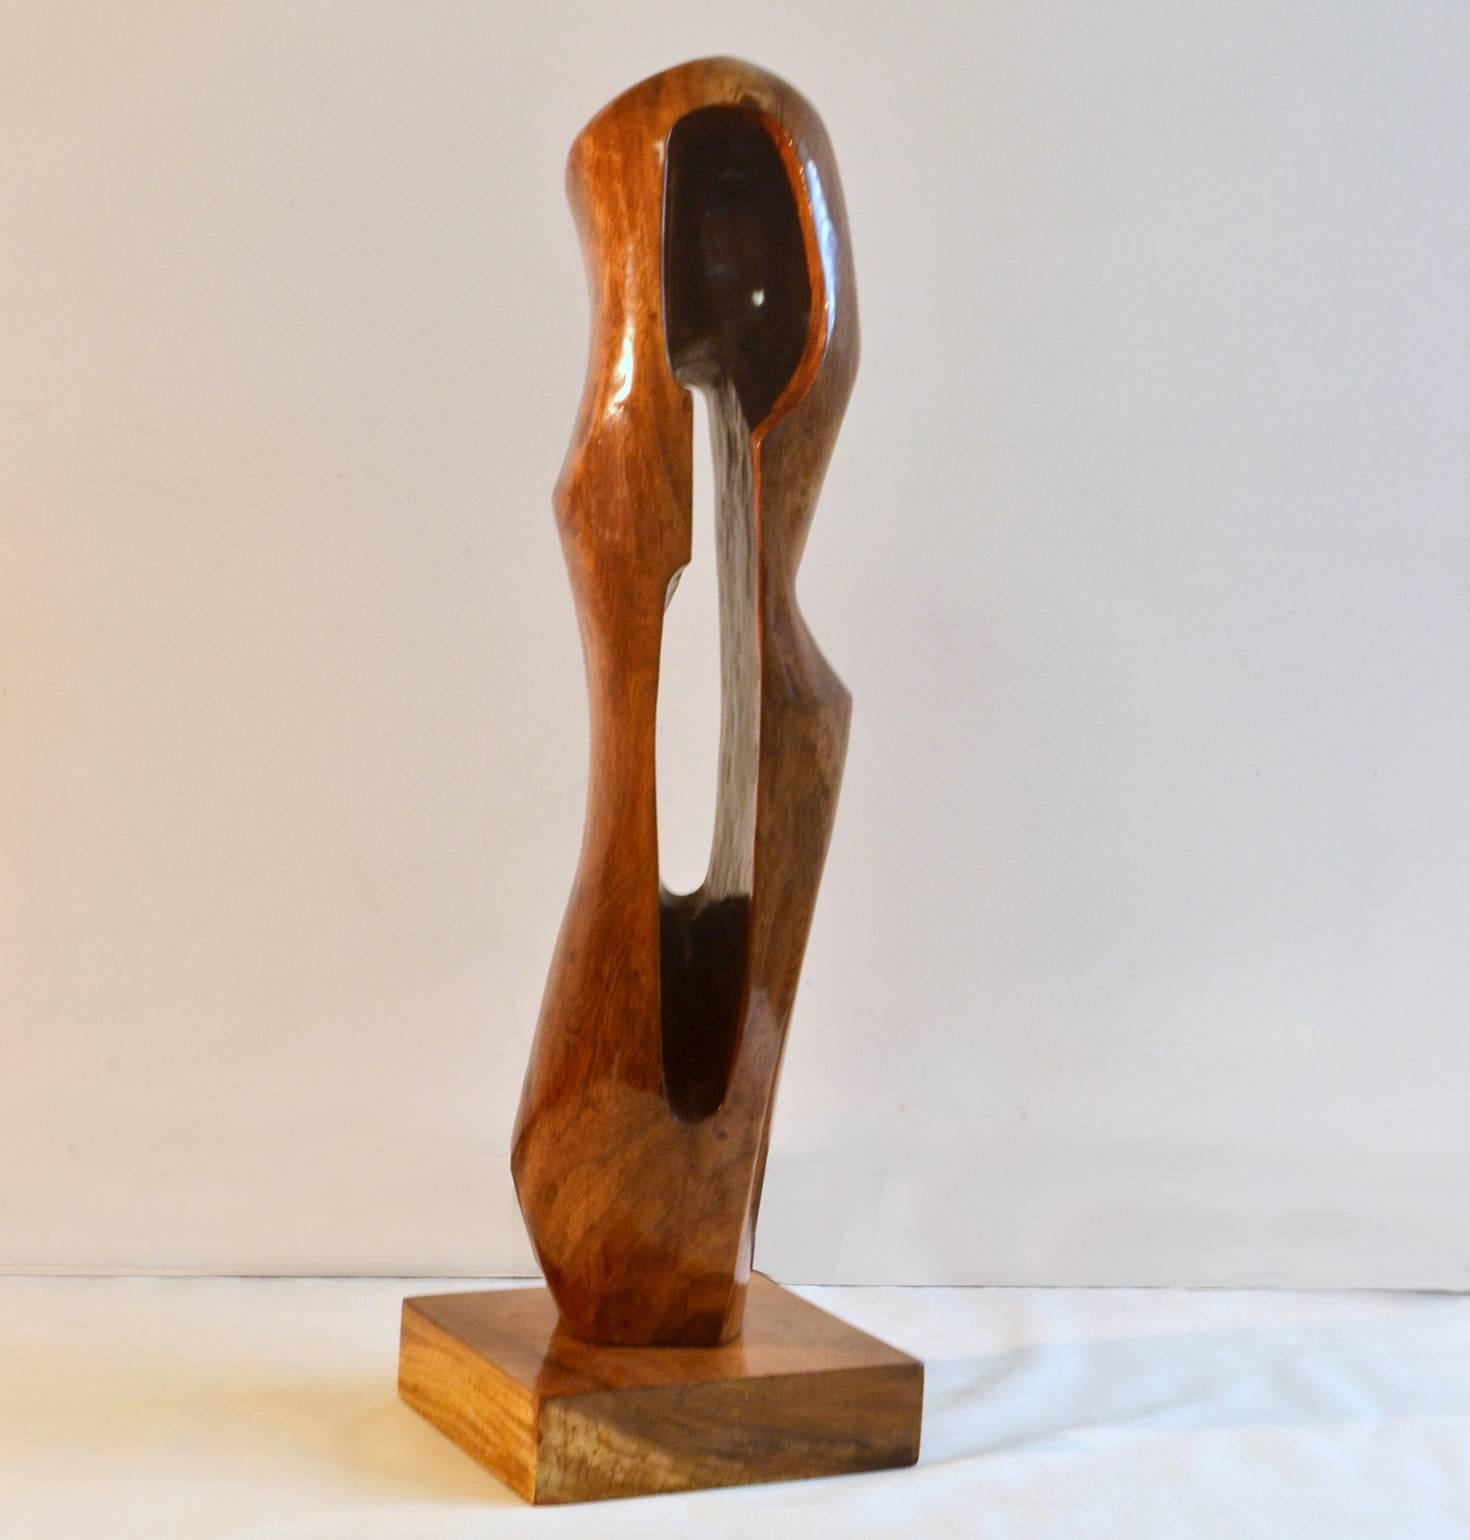 British  Midcentury Abstract Sculpture in Hand-Carved Wood Height 51 Inch / 13cm